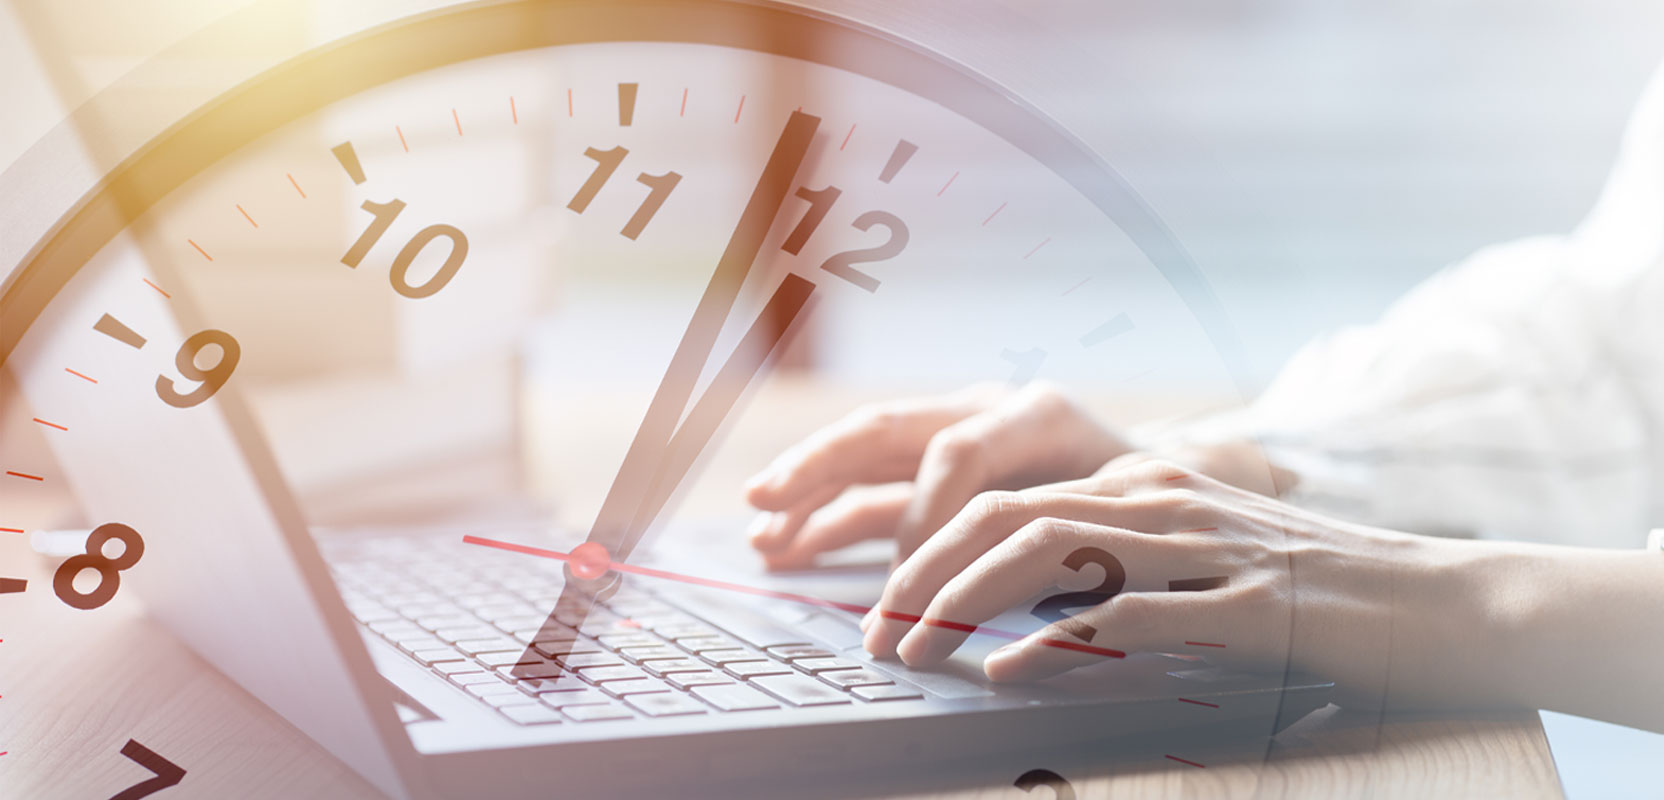 Person typing on a keyboard against a background showing a ticking clock